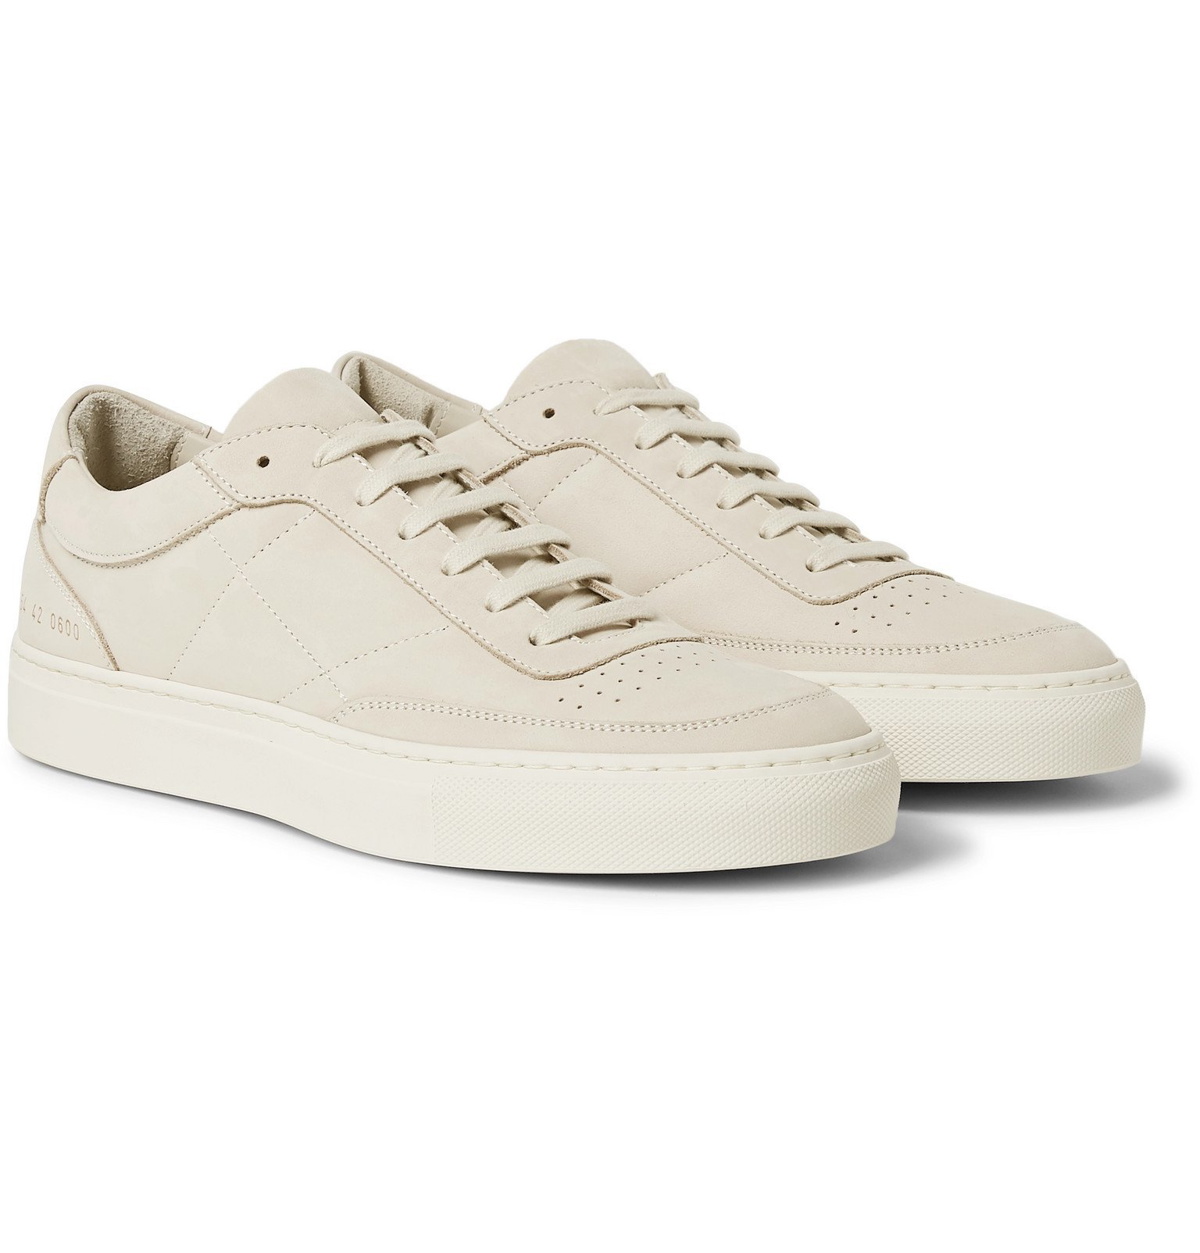 Common Projects - Resort Classic Nubuck Sneakers - Neutrals